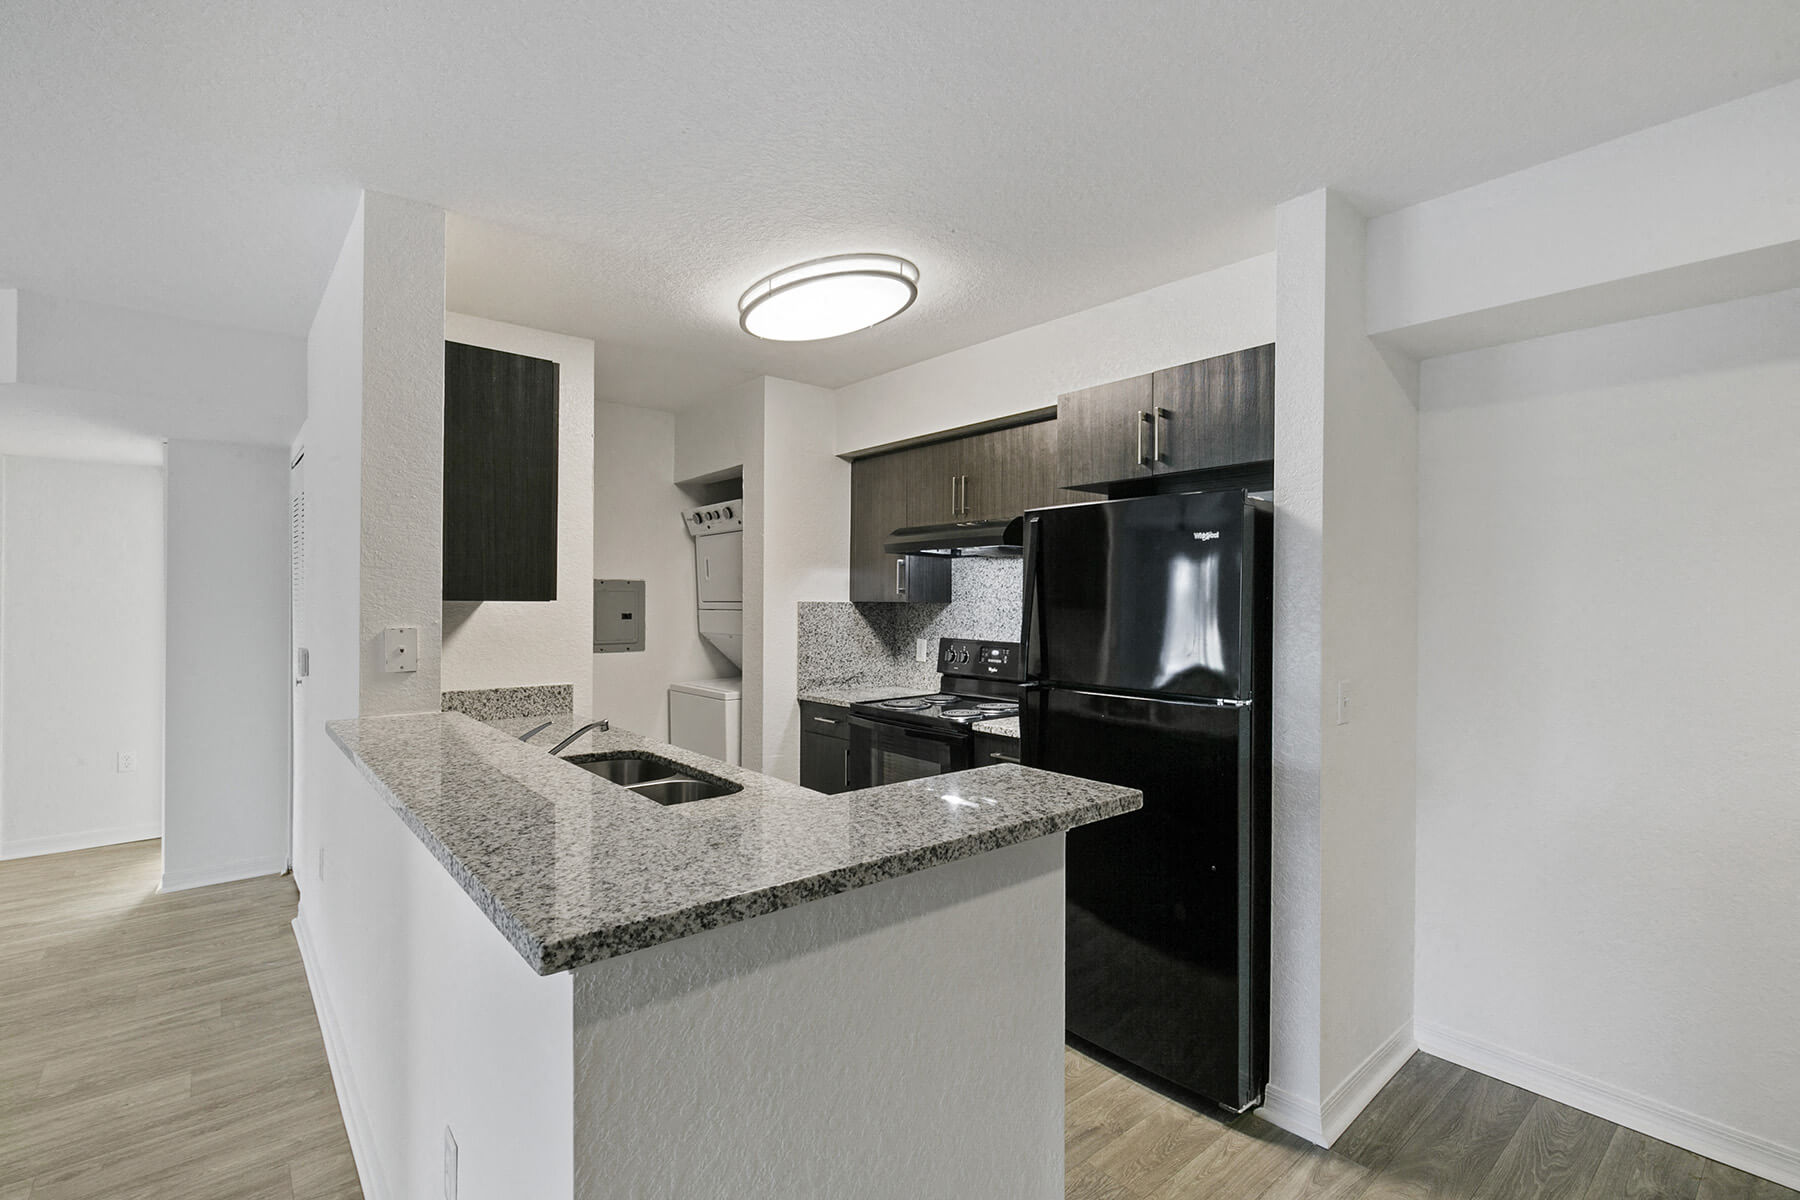 A bright, open kitchen at the Brenton at Abbey Park Apartments in West Palm Beach, Florida.